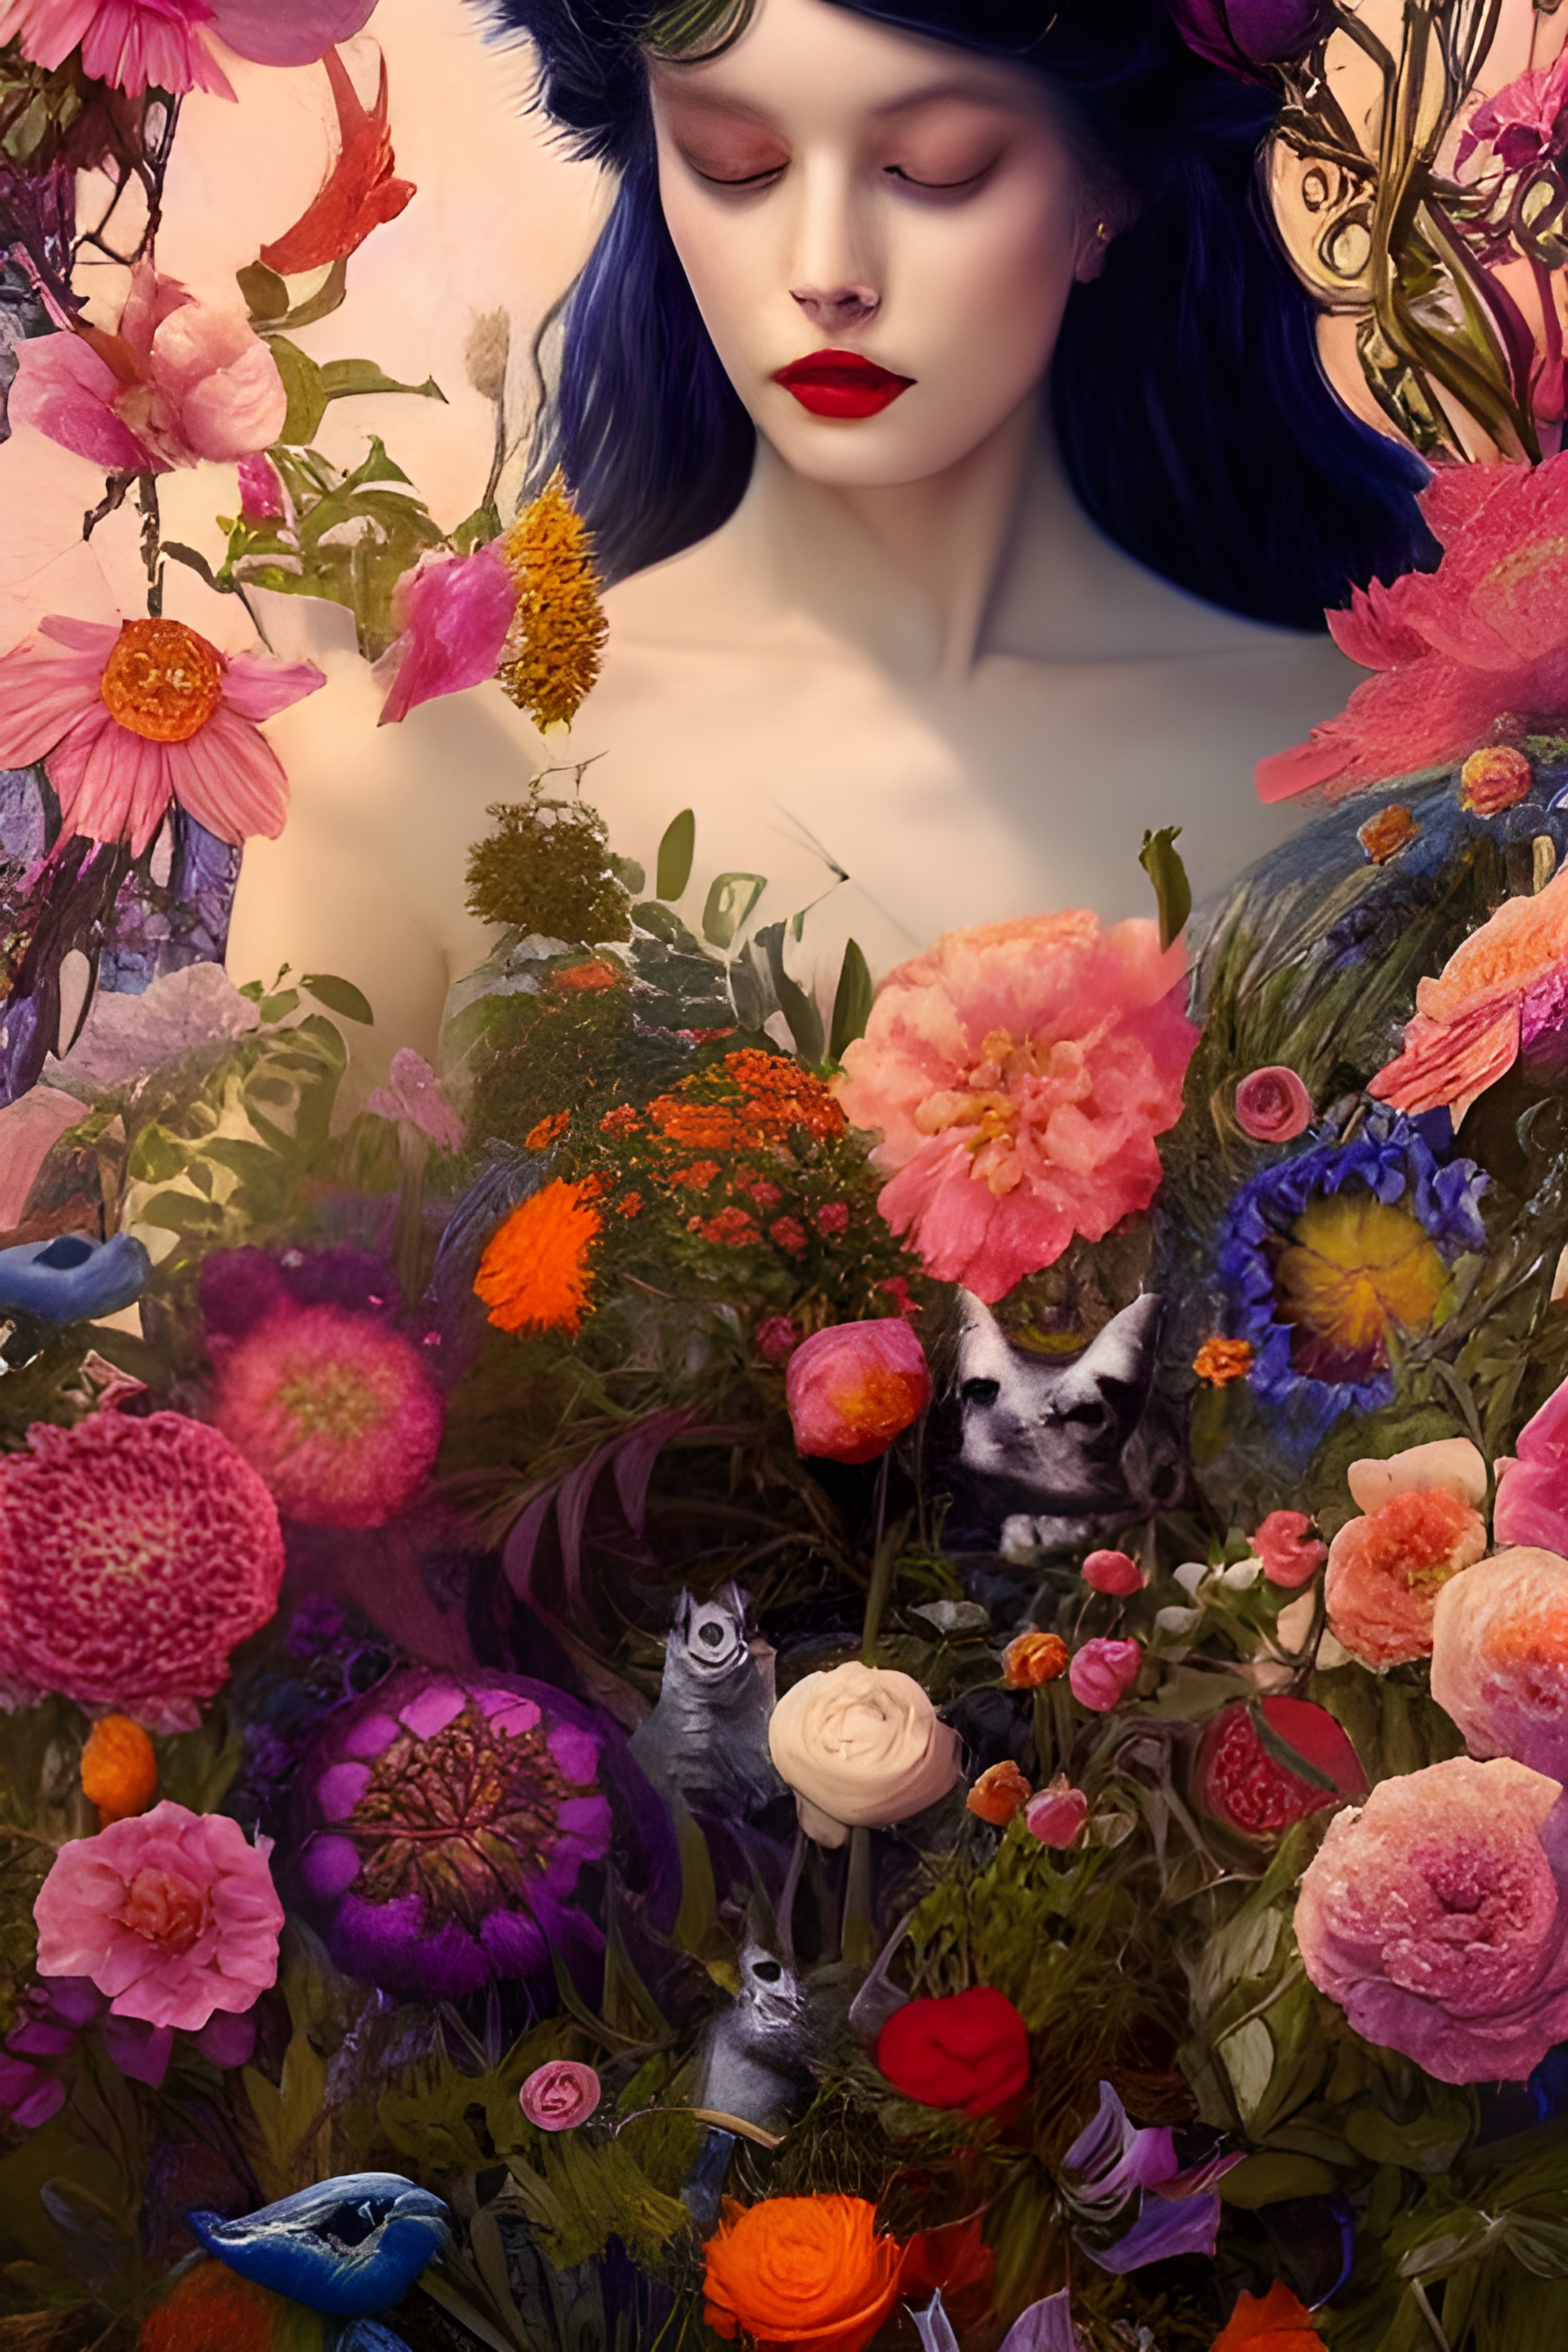 Beauty in the Flower Garden - non-exclusive personal use